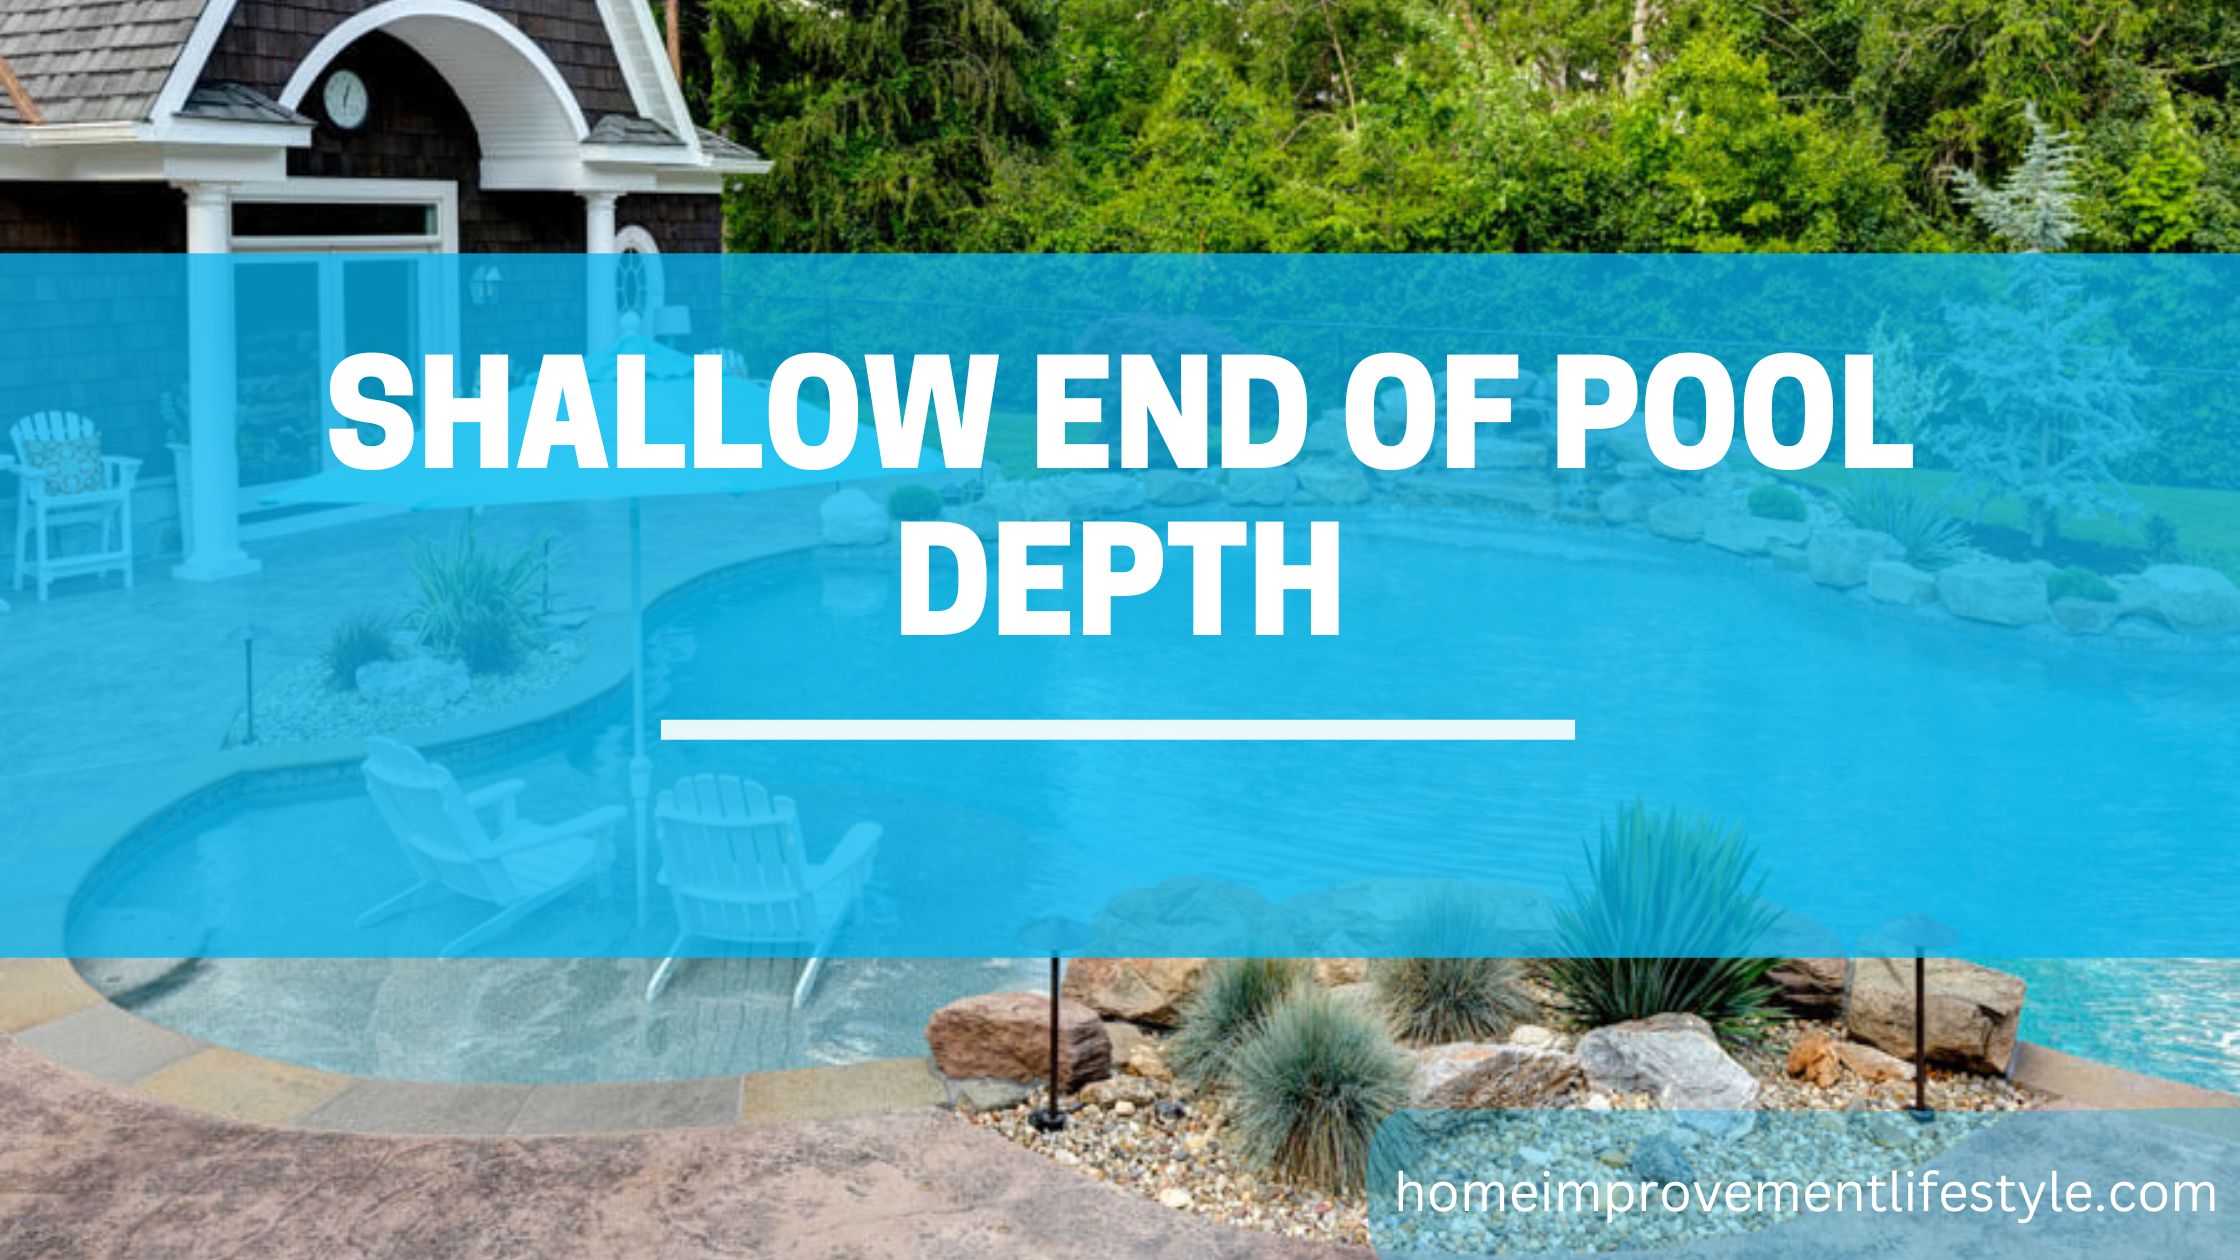 Shallow End of Pool Depth